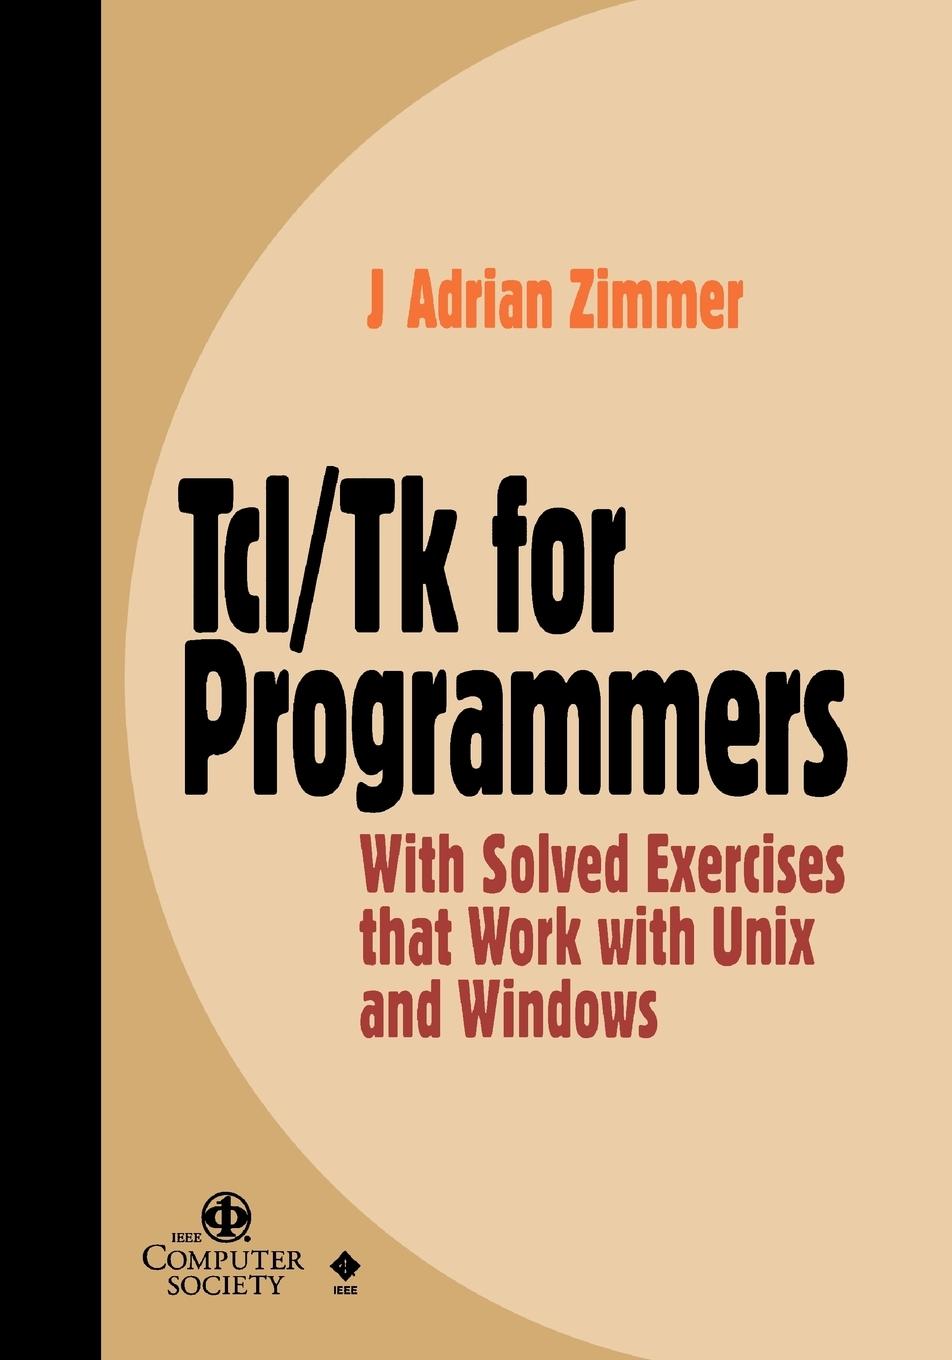 Tcl/Tk Programmers w/Solved Exercises - Zimmer